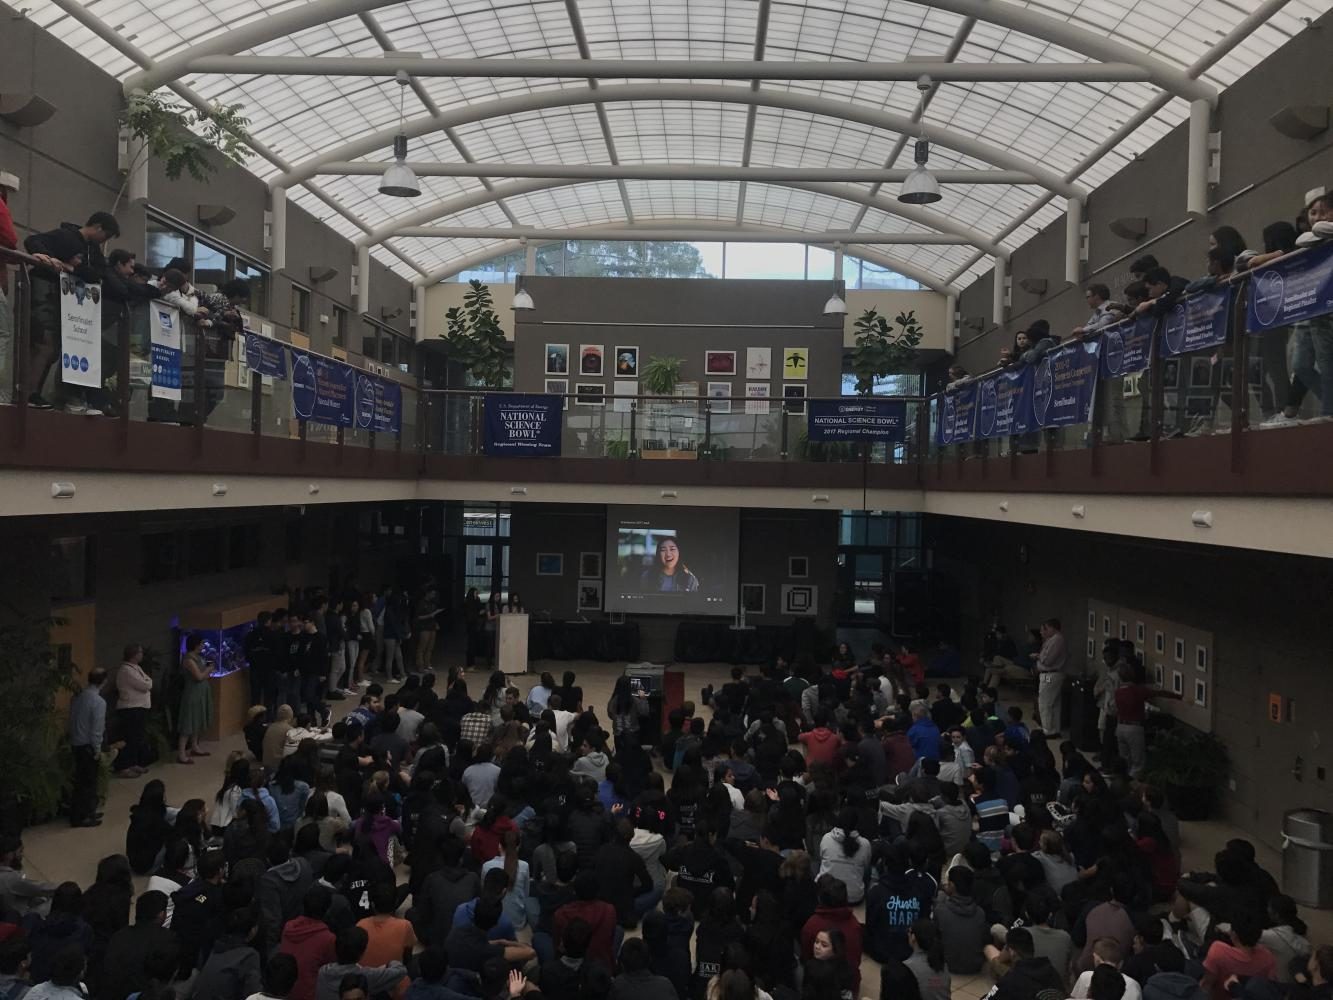 The juniors, sophomores and freshmen gather in Nichols Atrium for todays school meeting. The seniors, who were not at school today, will be back tomorrow for Wednesdays Baccalaureate ceremony.